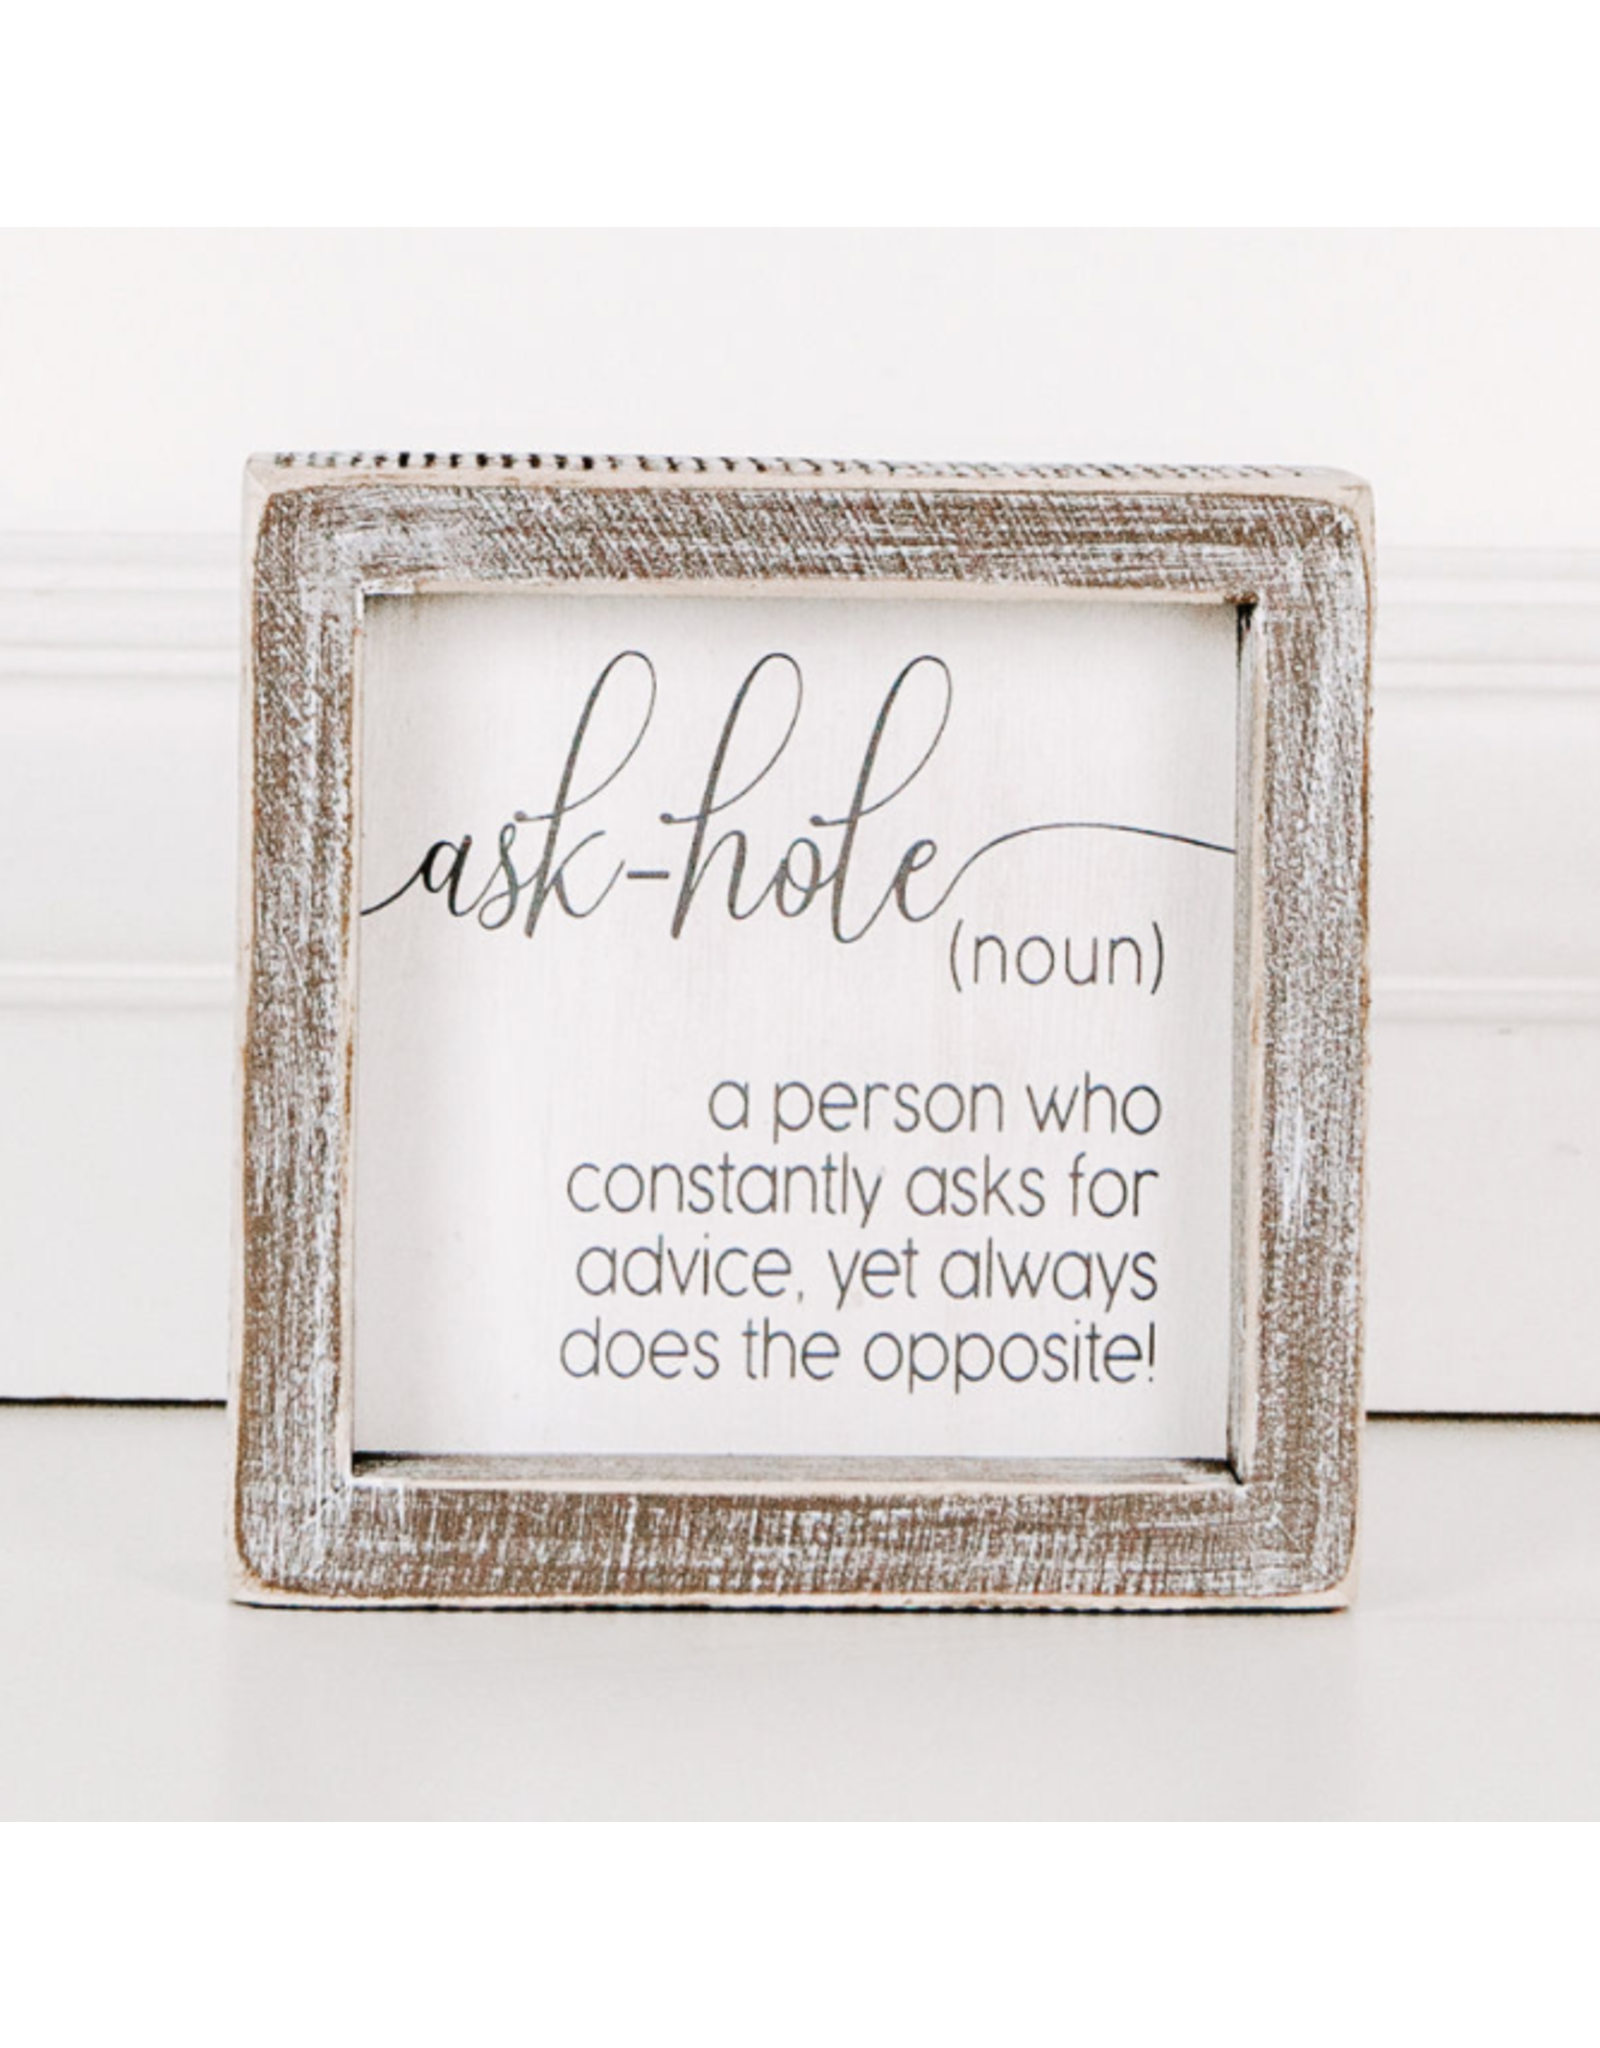 Adams & Co. Wood Sign "Ask-Hole"